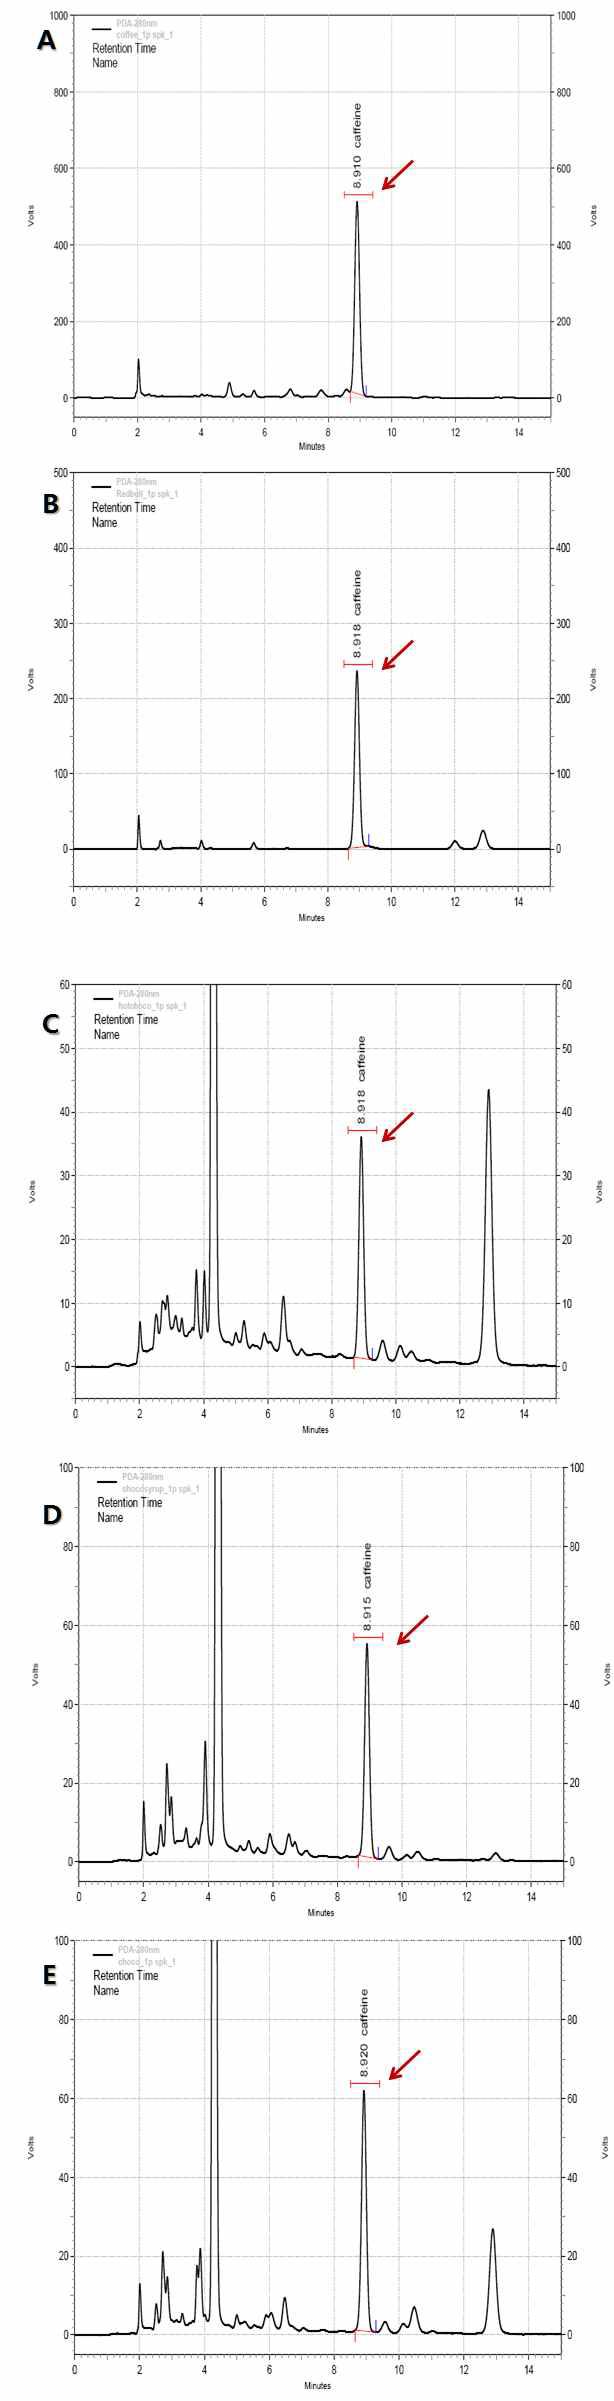 Chromatograms of five samples at a spiking level of 1 ppm.